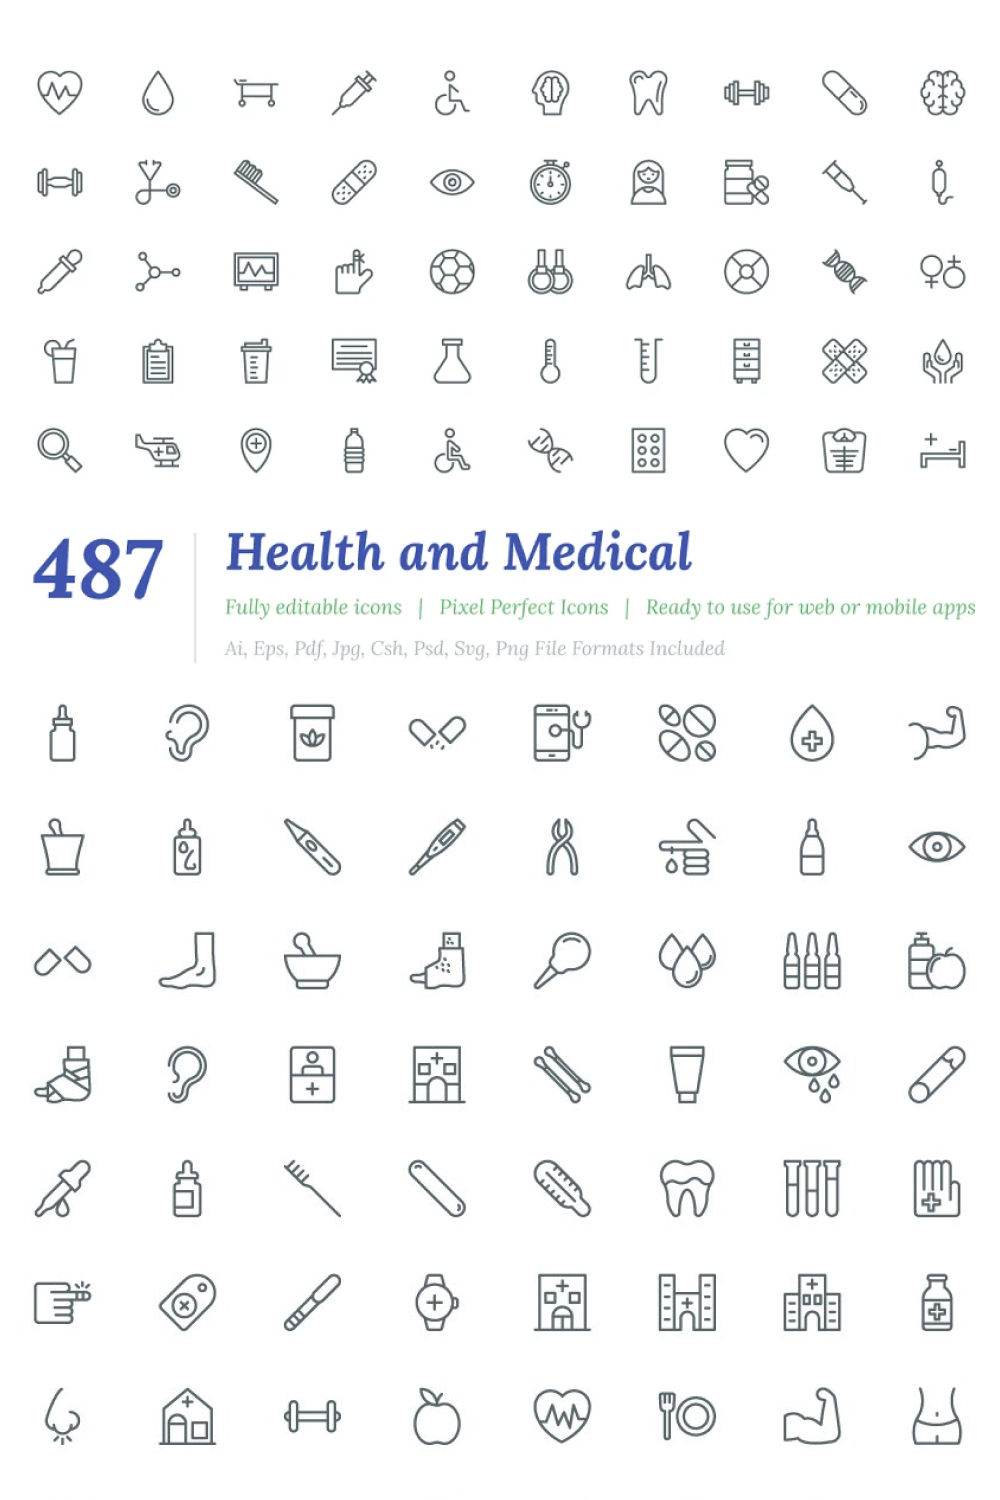 Illustrations health and medical line icons of pinterest.